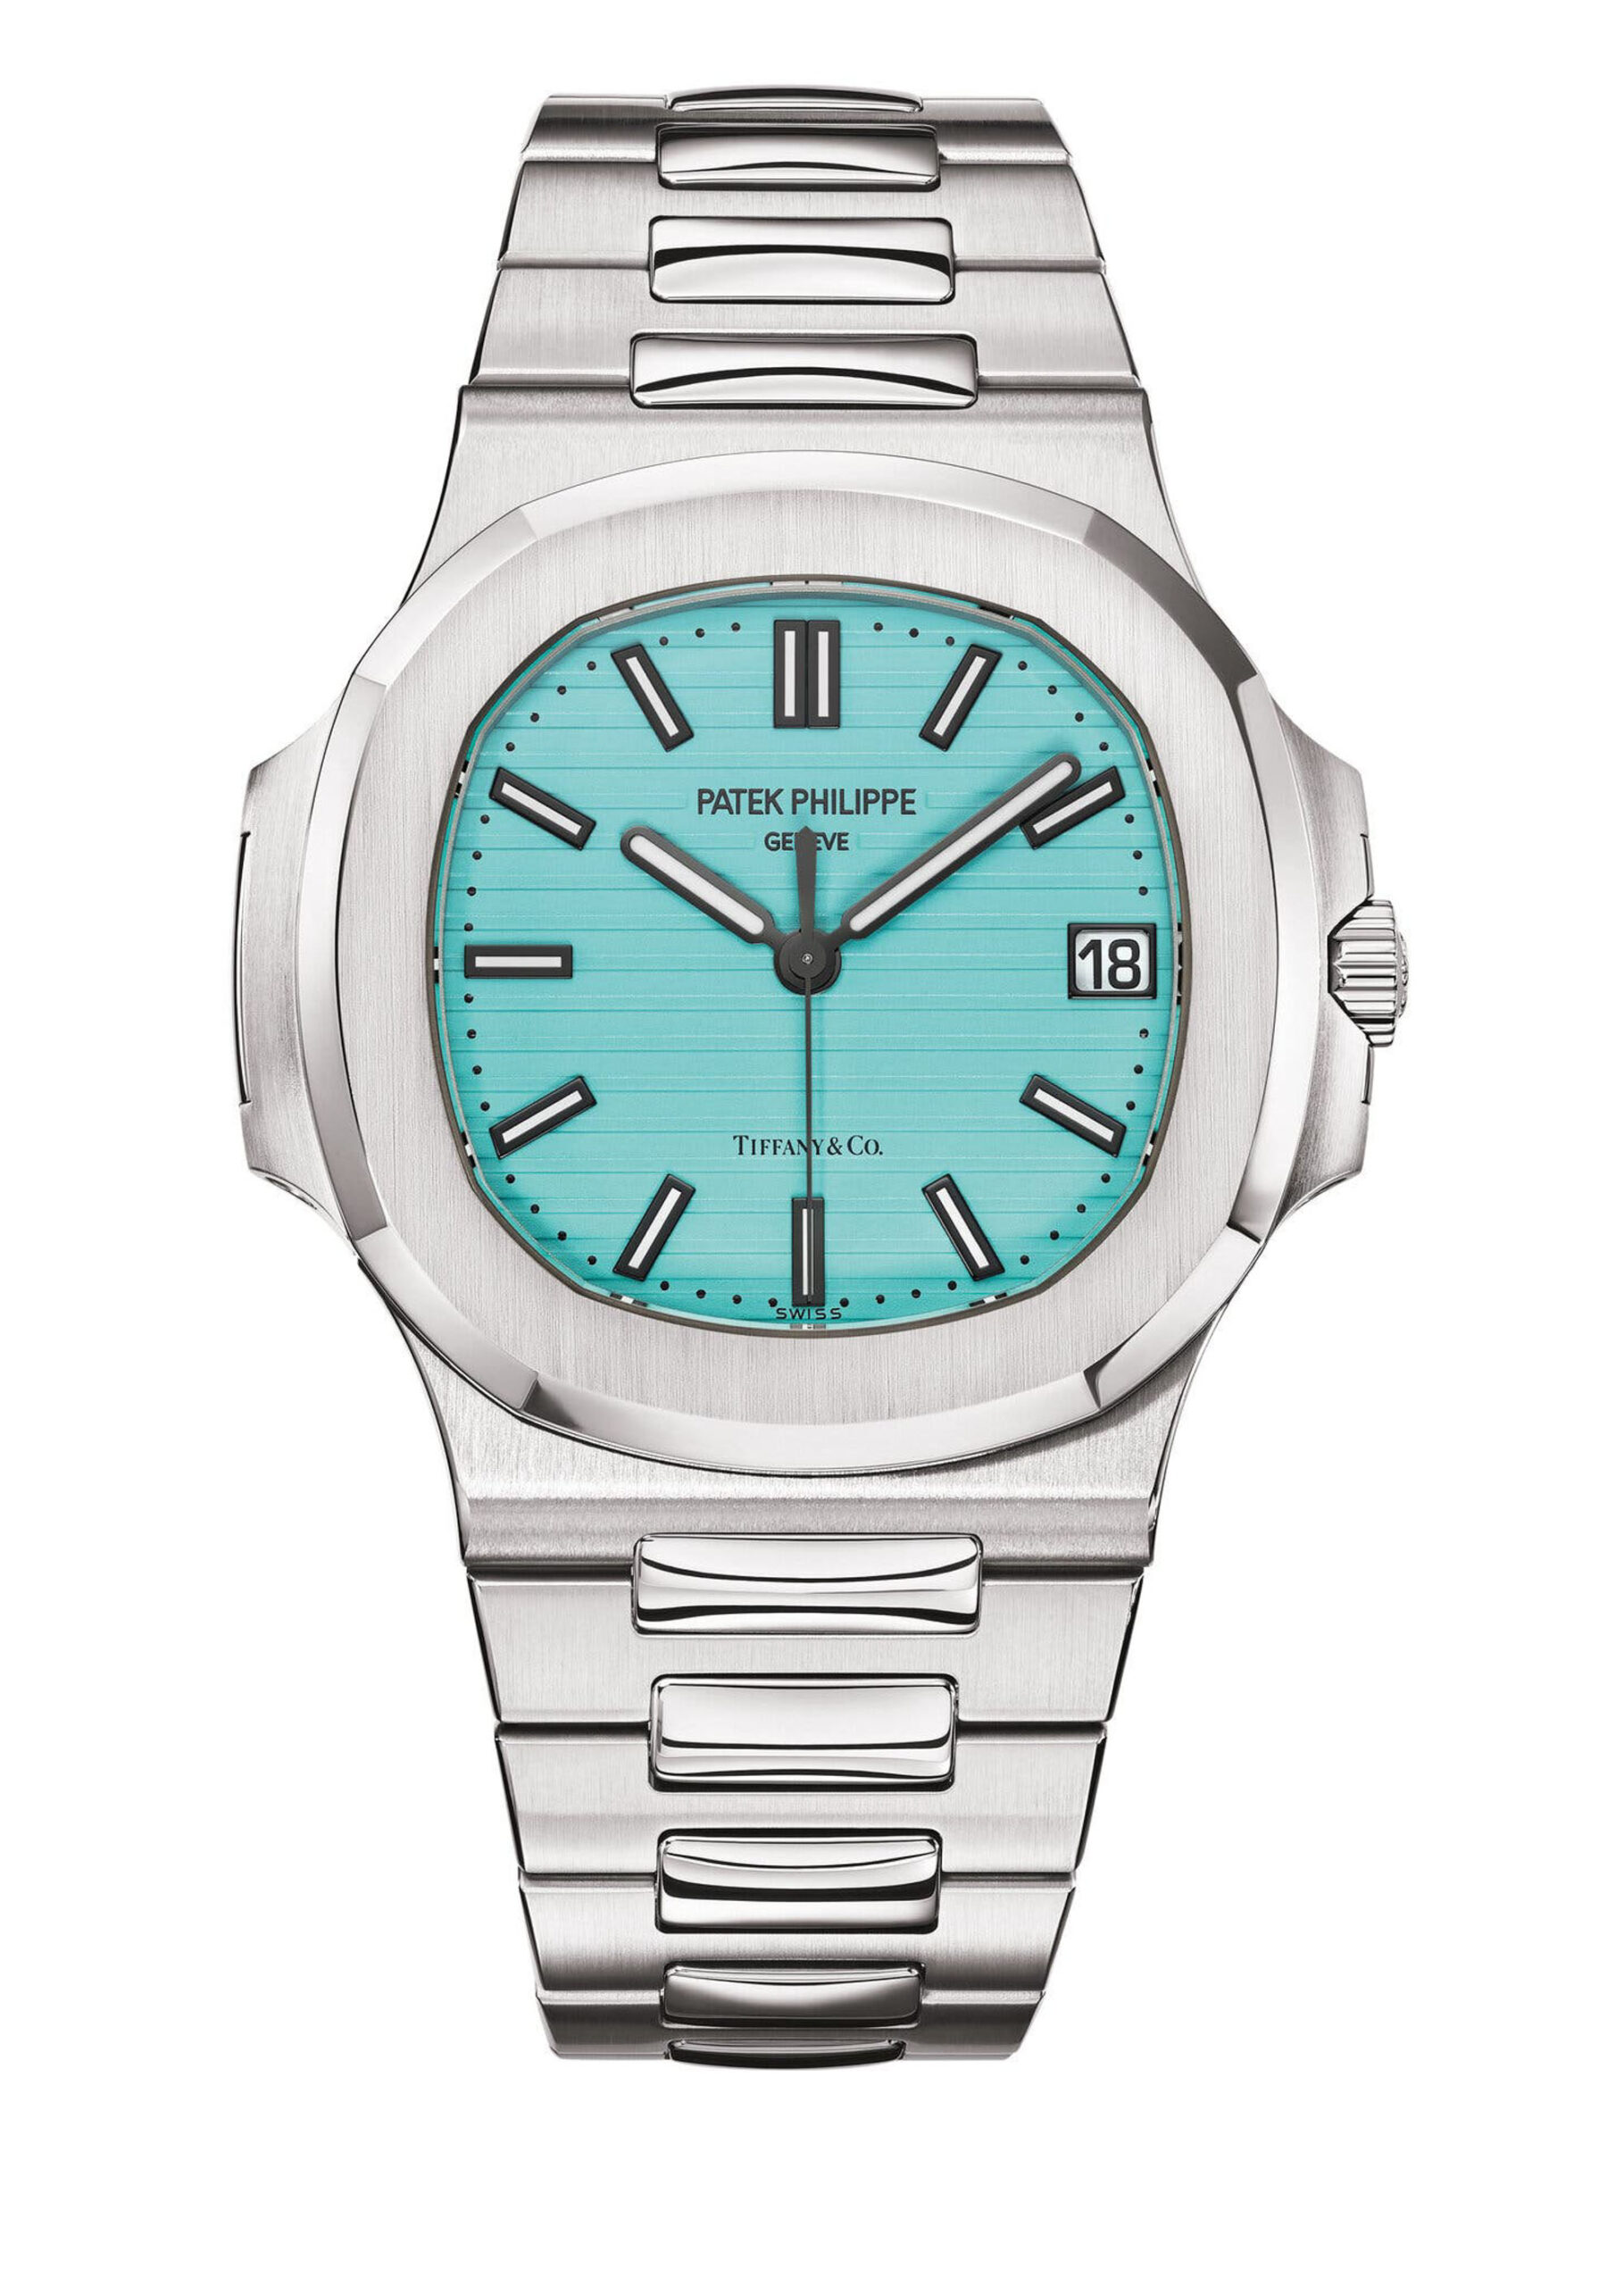 The Tiffany-Blue Patek Philippe Nautilus 5711, What it Means to Watches —  Life on the Wrist